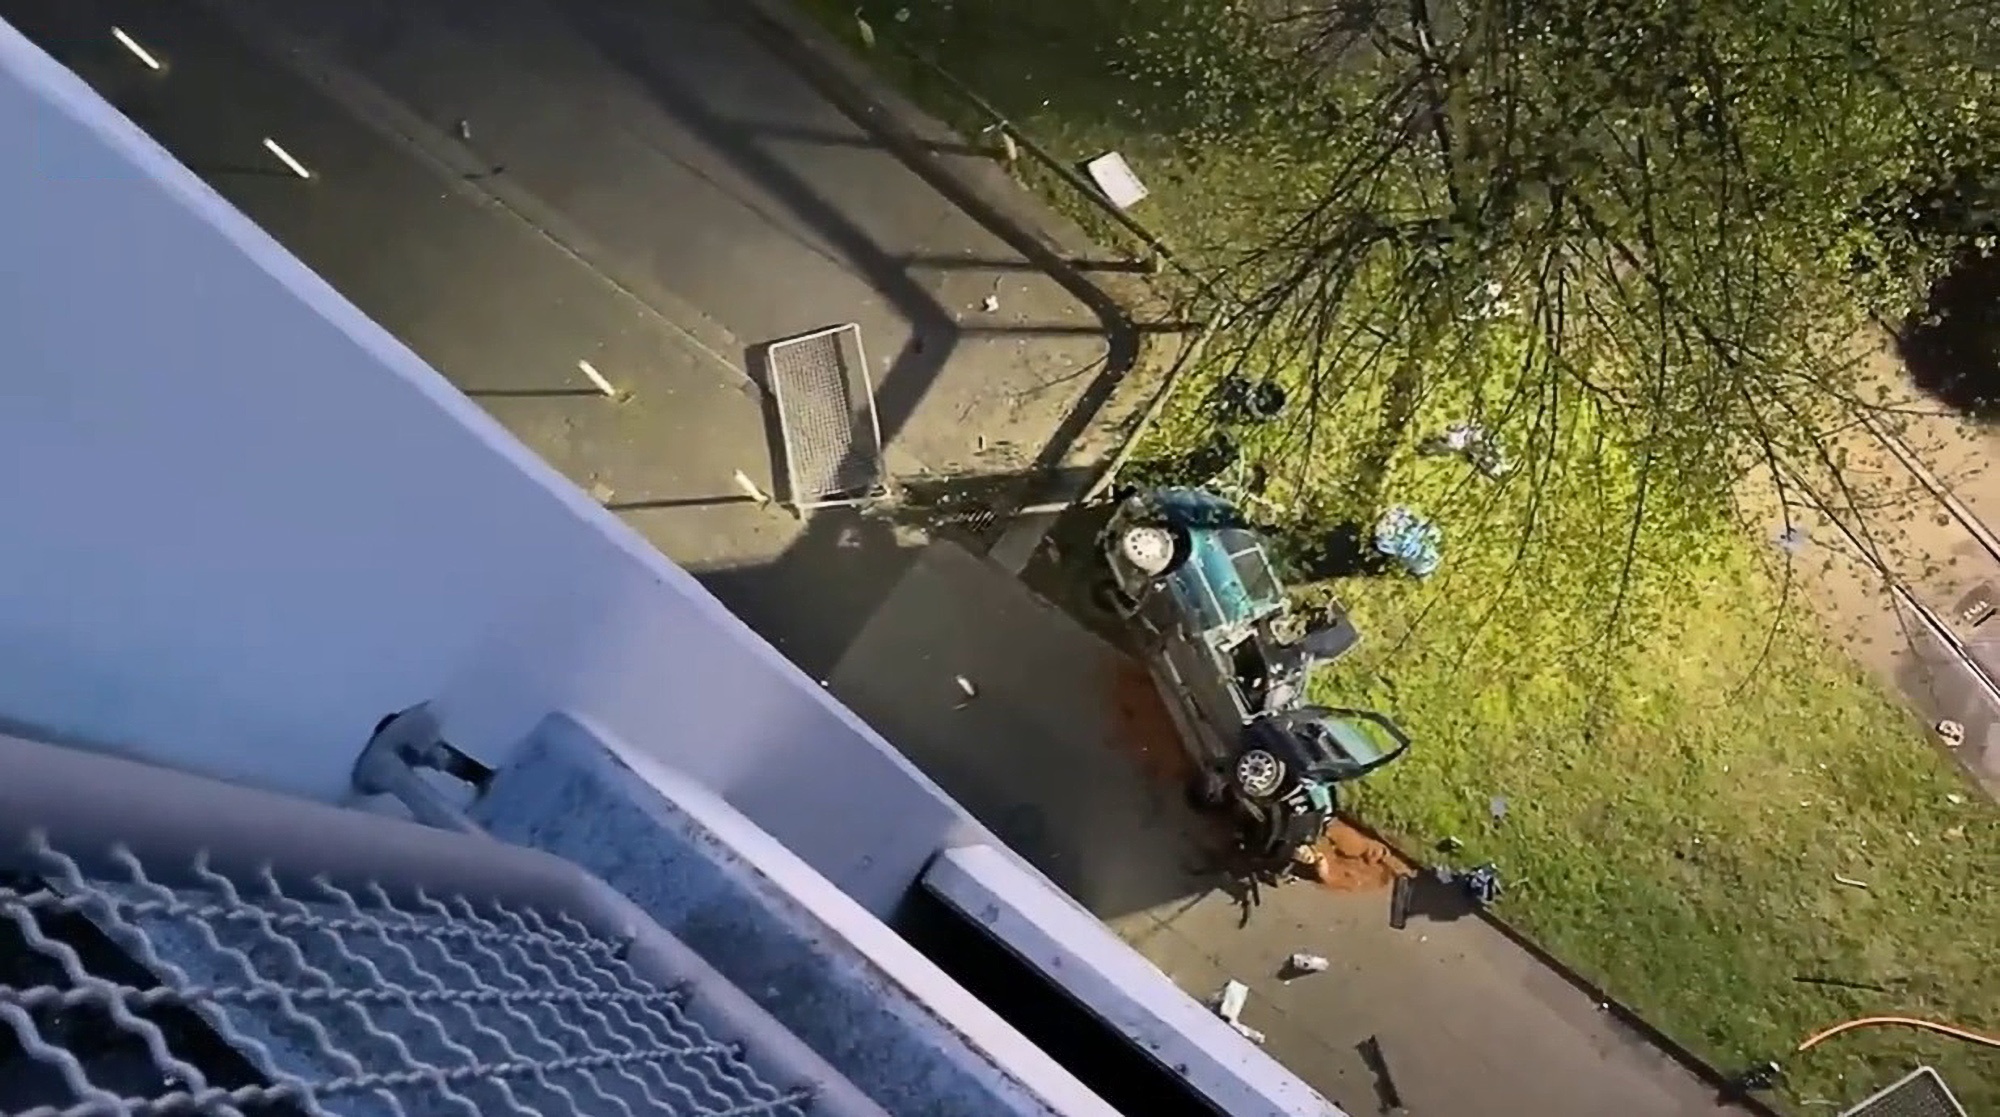 Read more about the article DRFTING OFF: Teen Stunt Drivers Crash From Top Floor Of Disused Multi-Storey Car Park In Germany